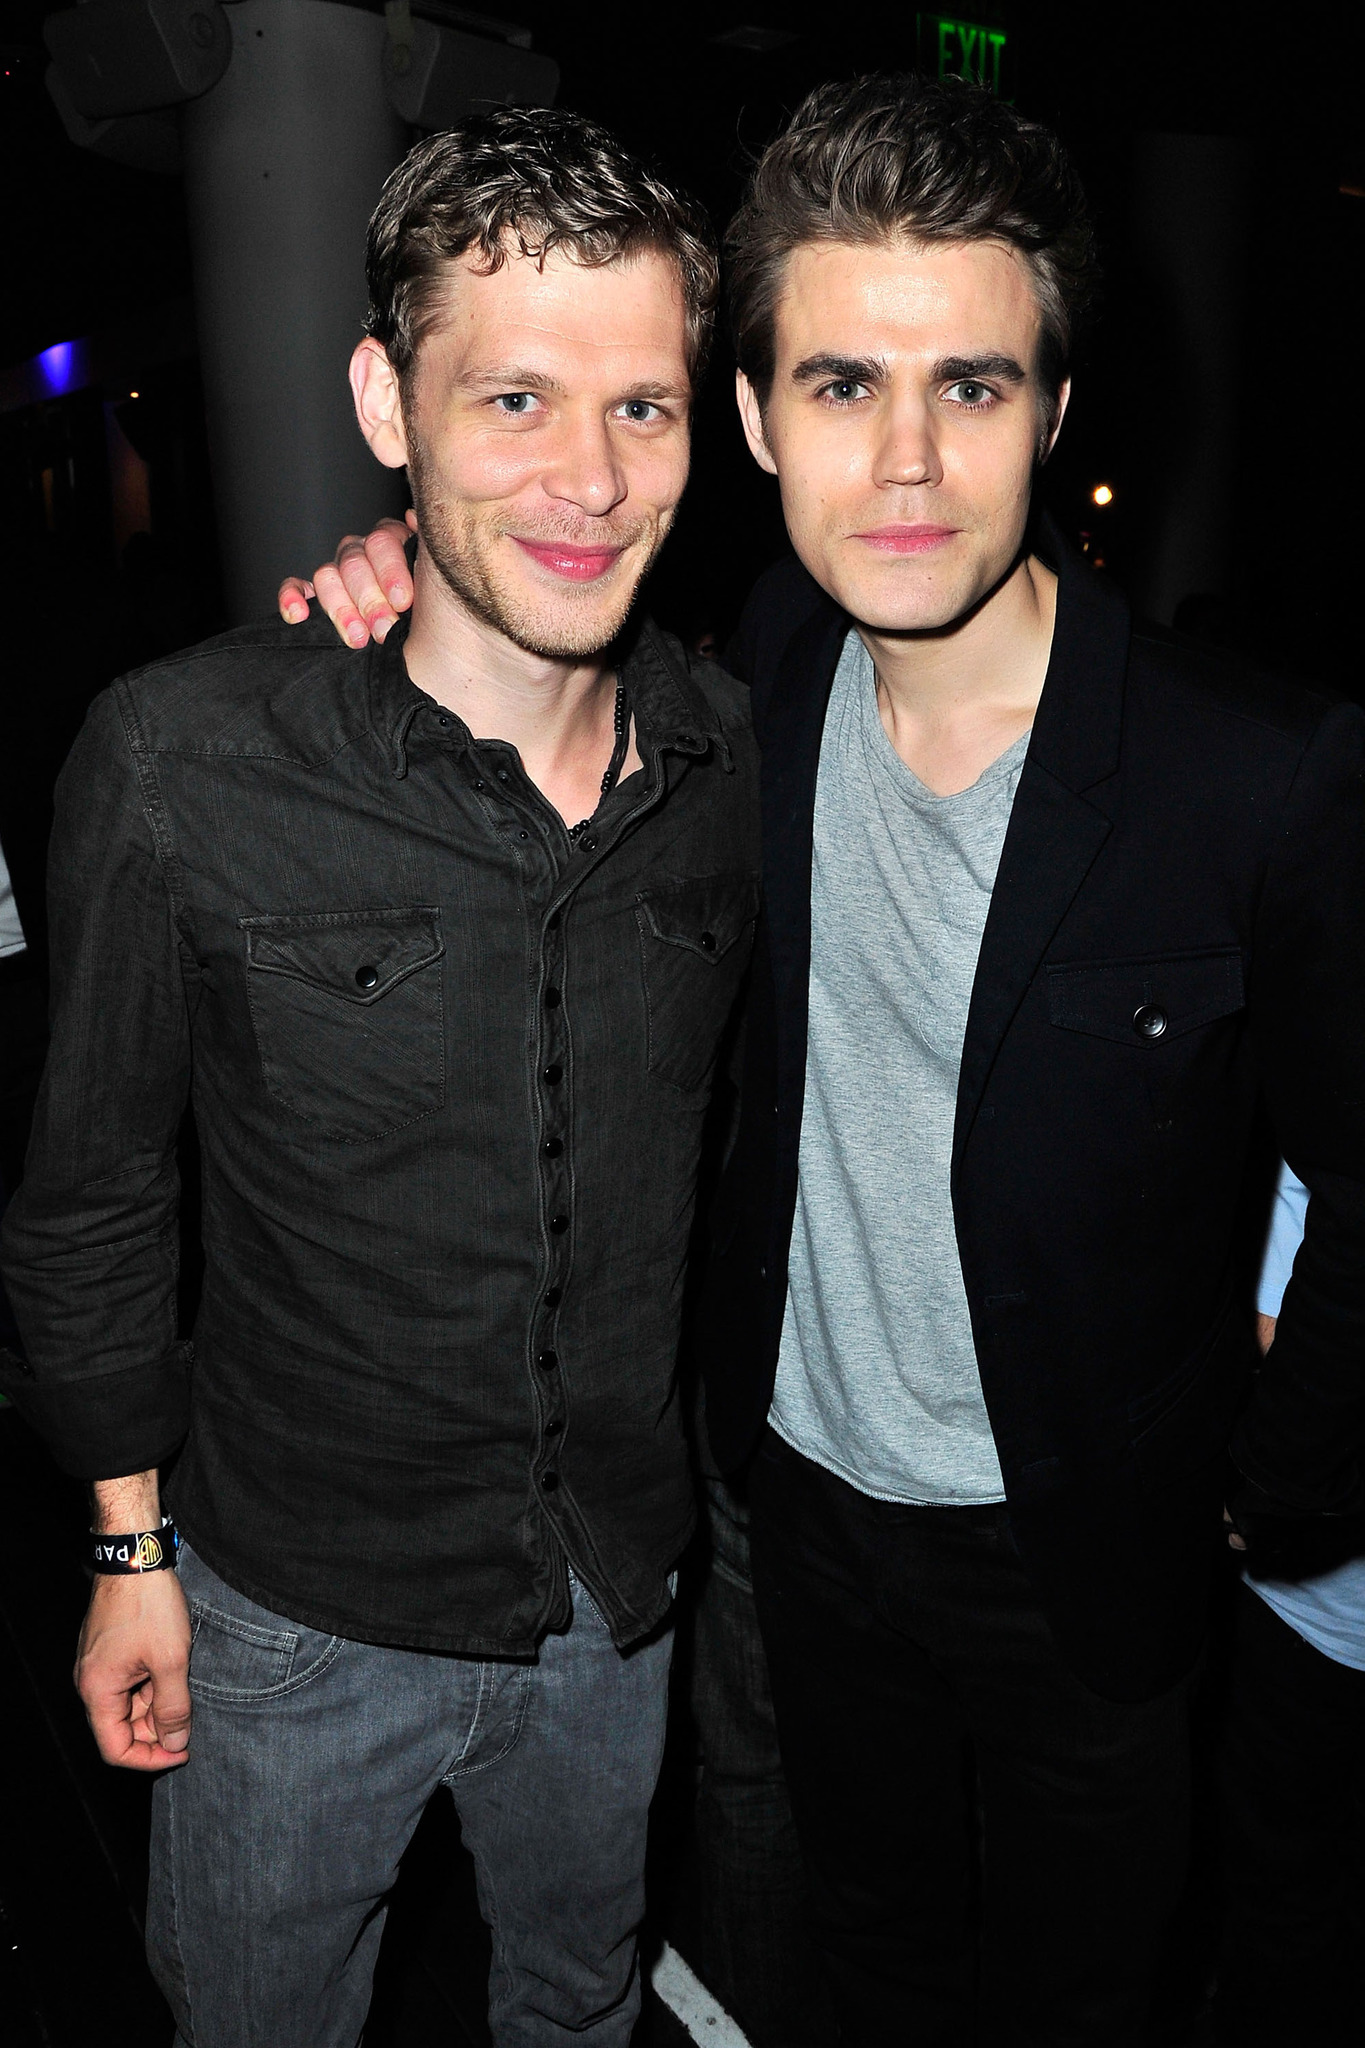 Joseph Morgan and Paul Wesley at event of Zmogus is plieno (2013)